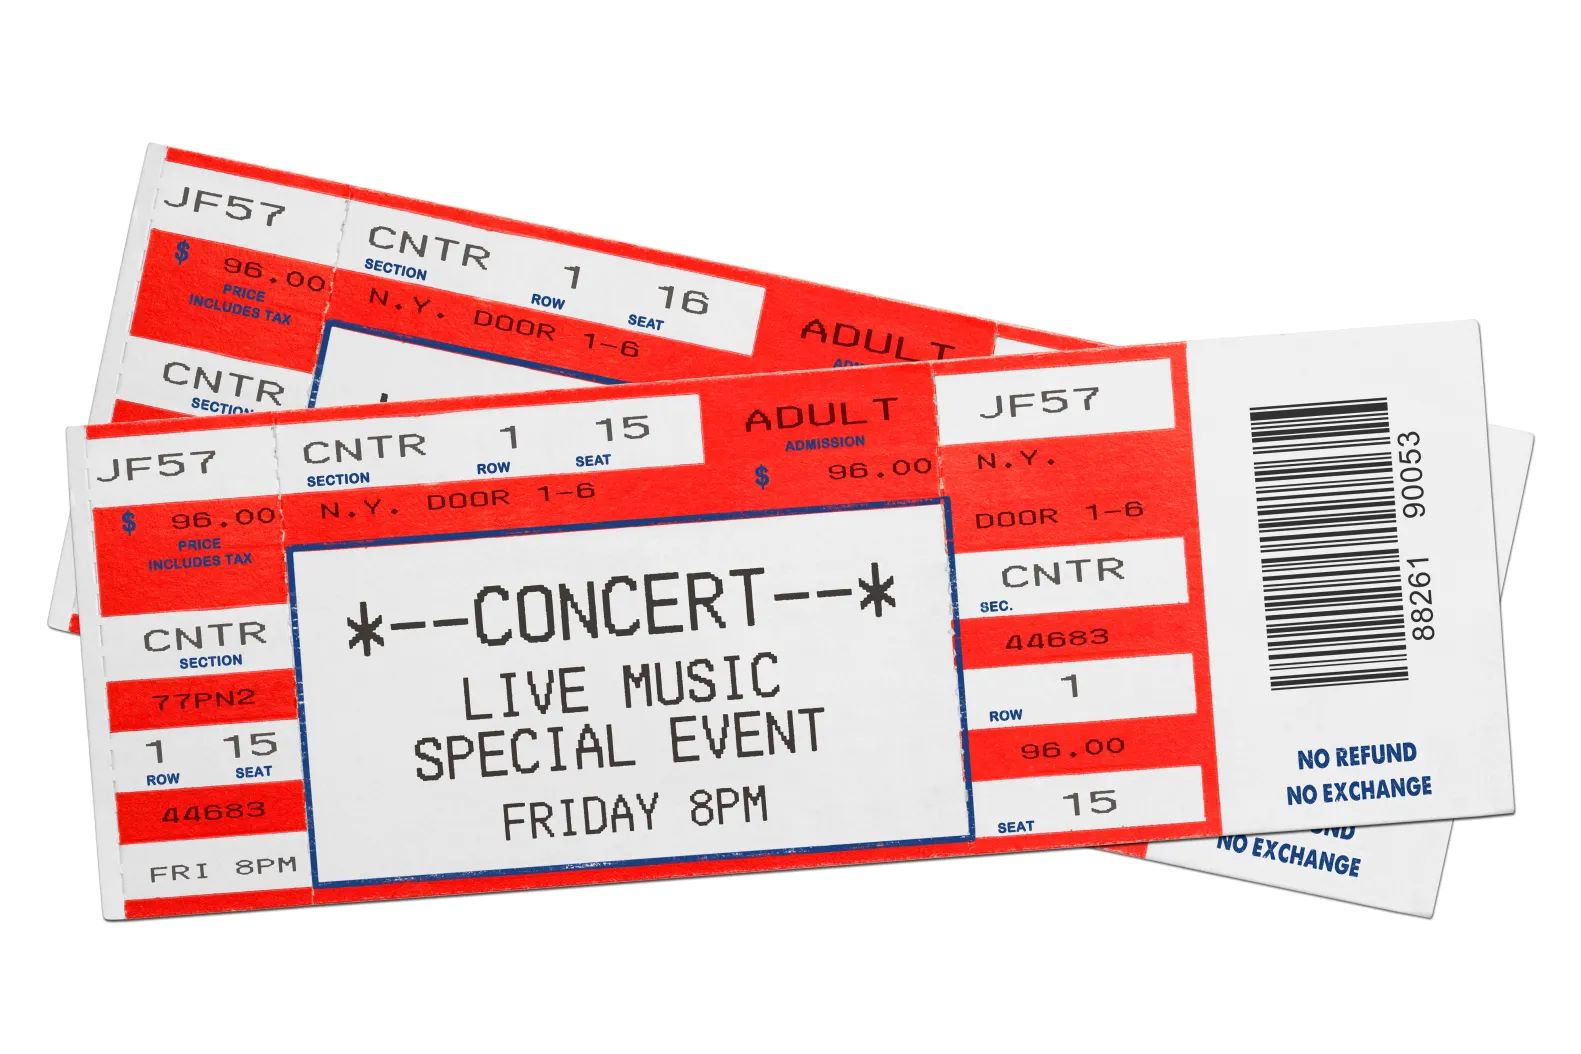 Concert Tickets Review: Unbiased Analysis and Recommendations